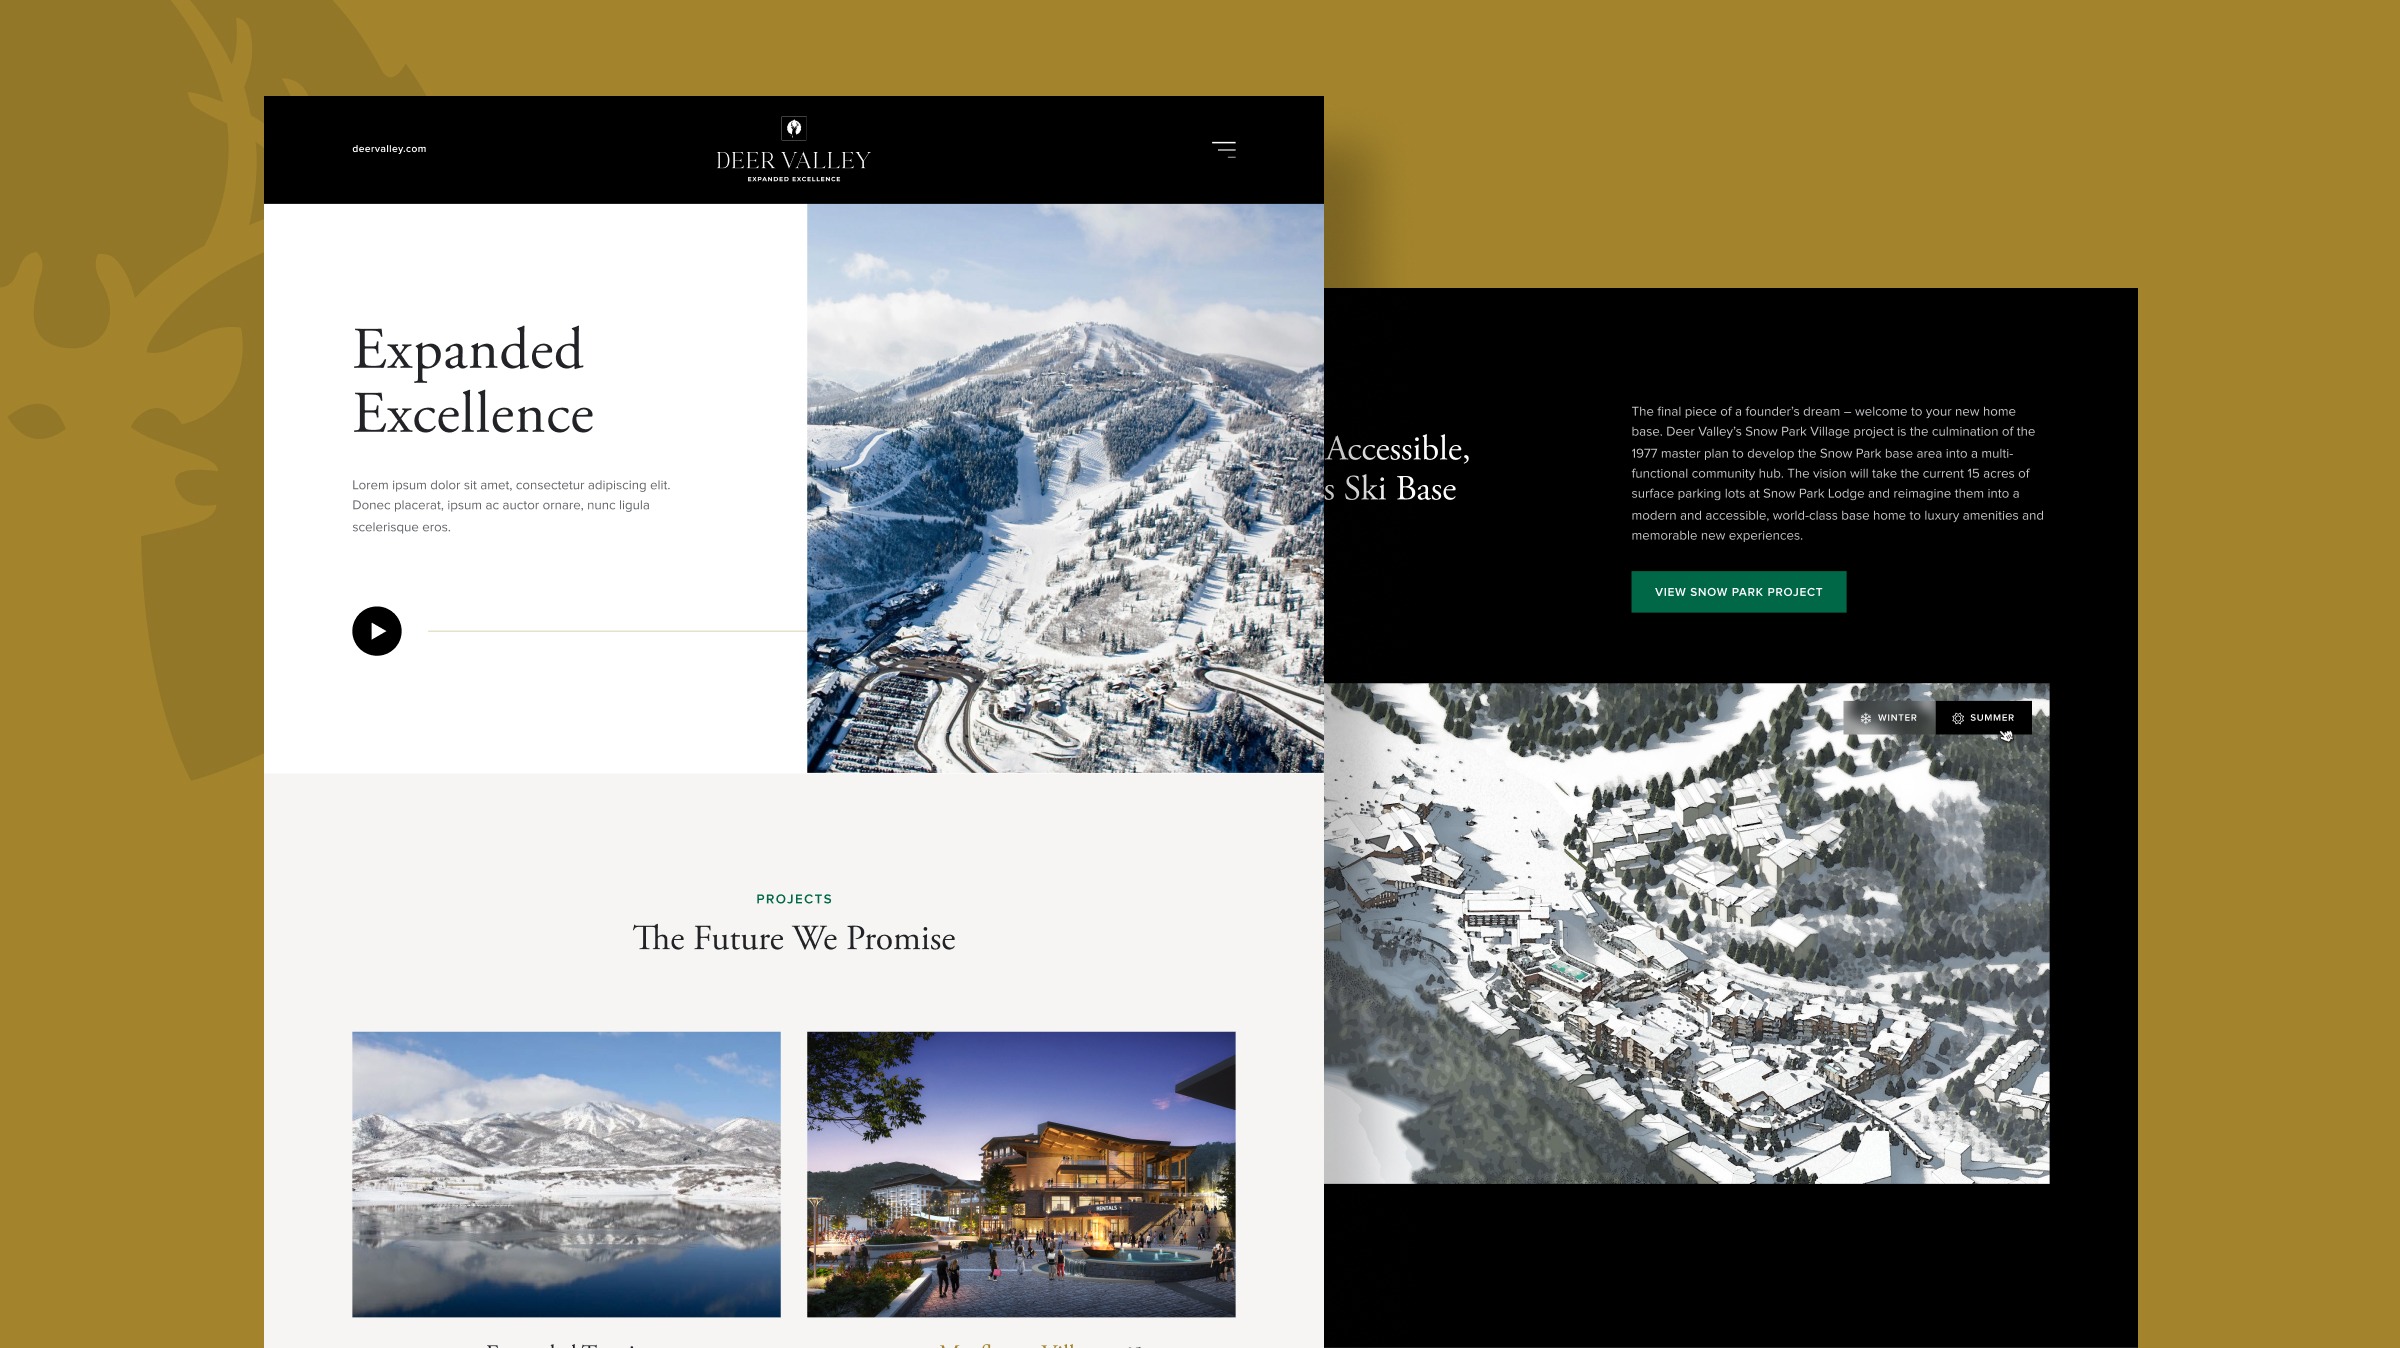 Preview of the Deer Valley website redesign for their ski resort expansion project